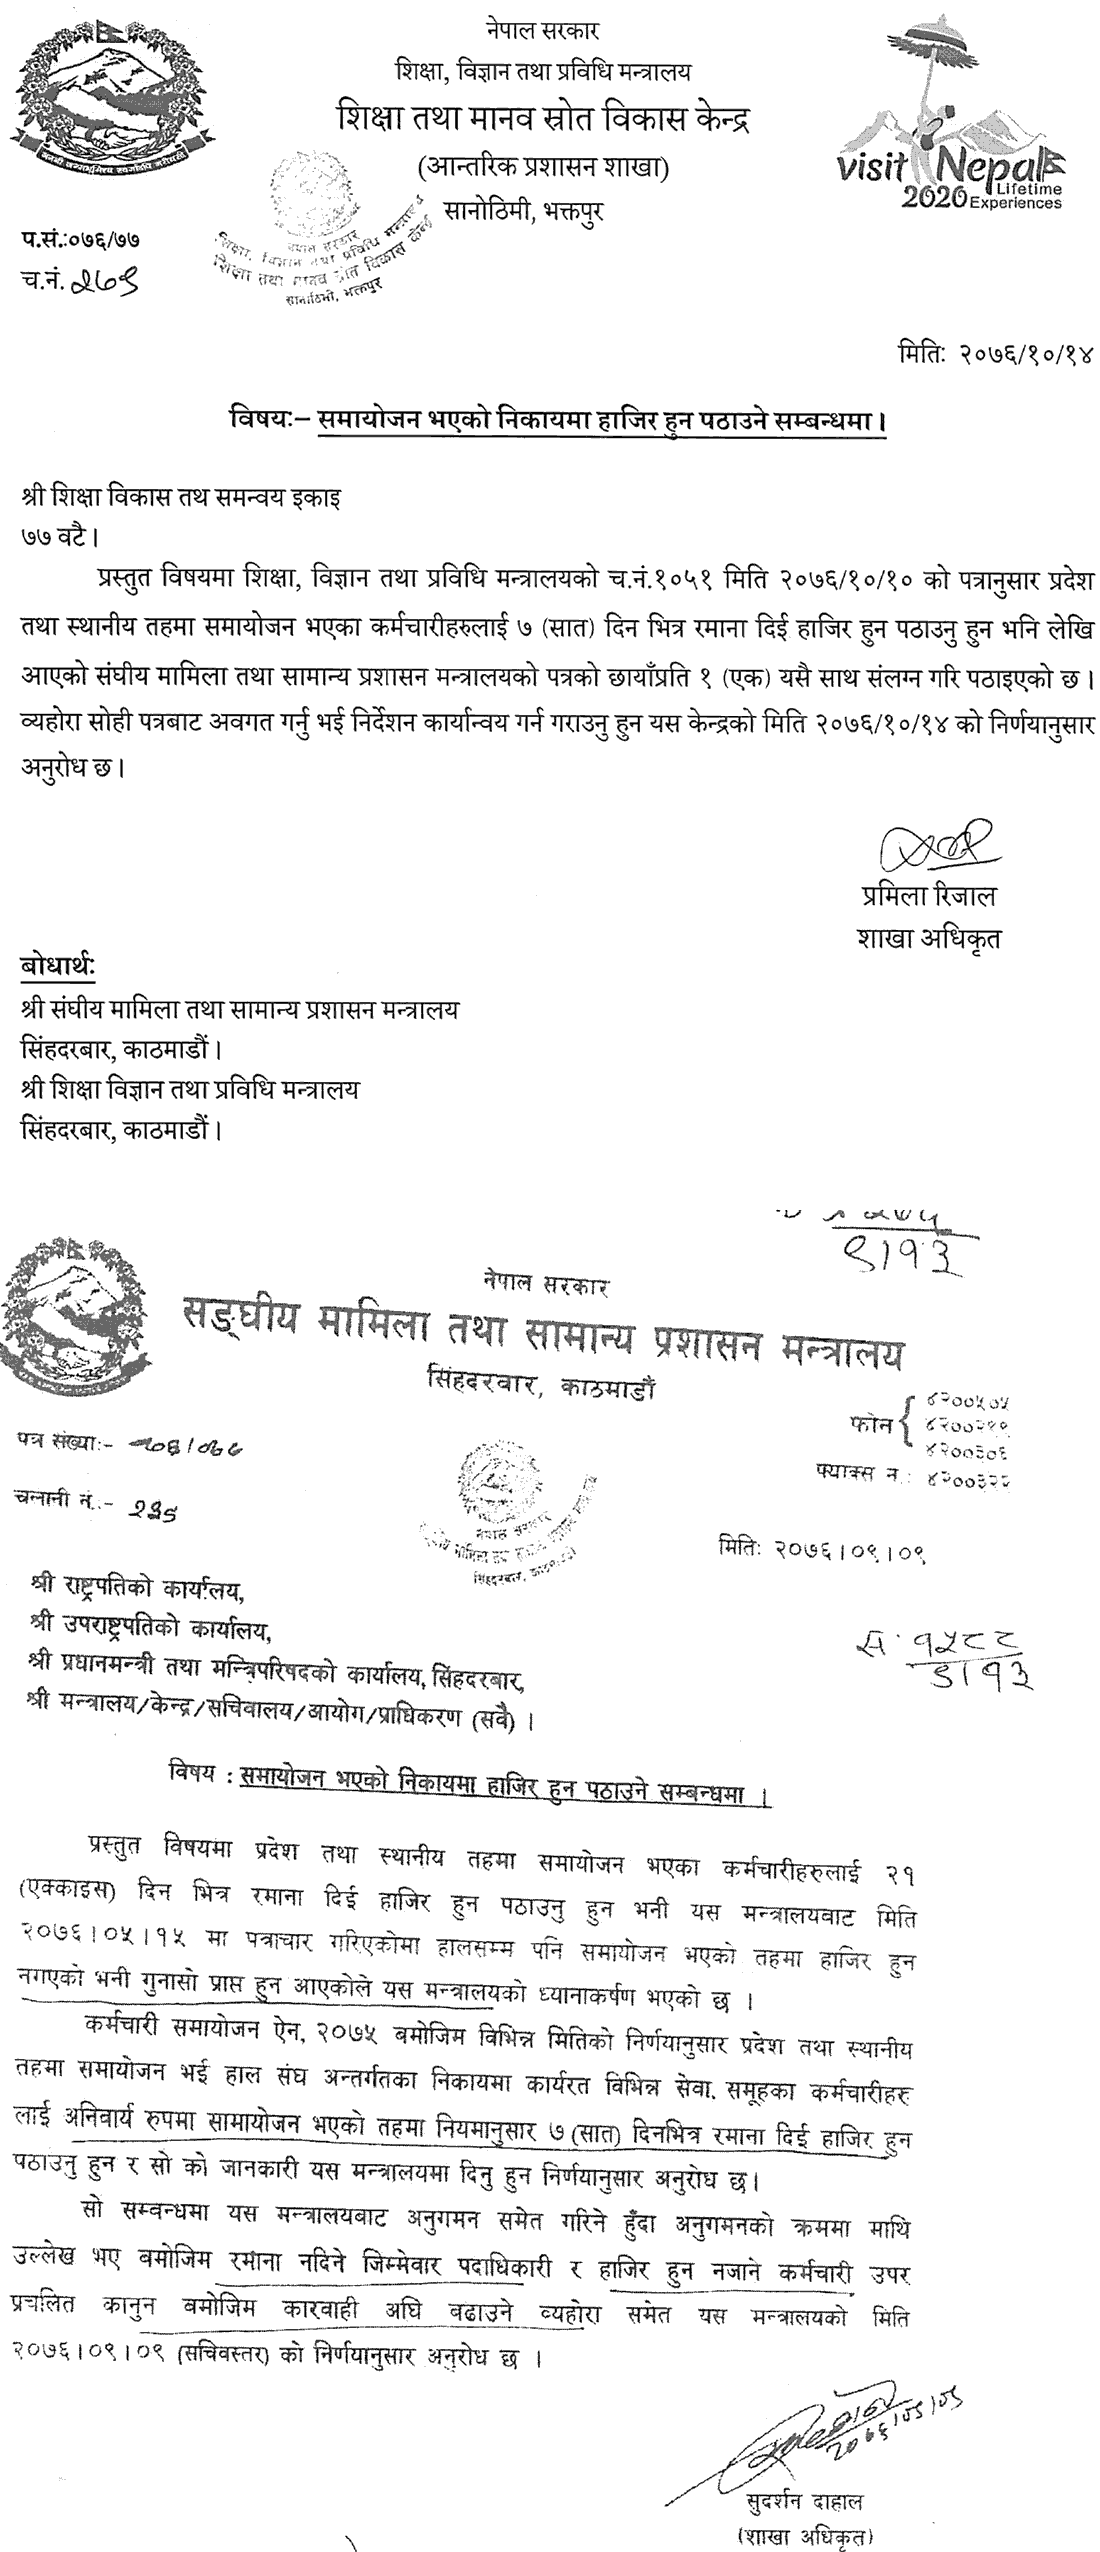 Ministry of Education Notice Dated on 2076 Magh 15